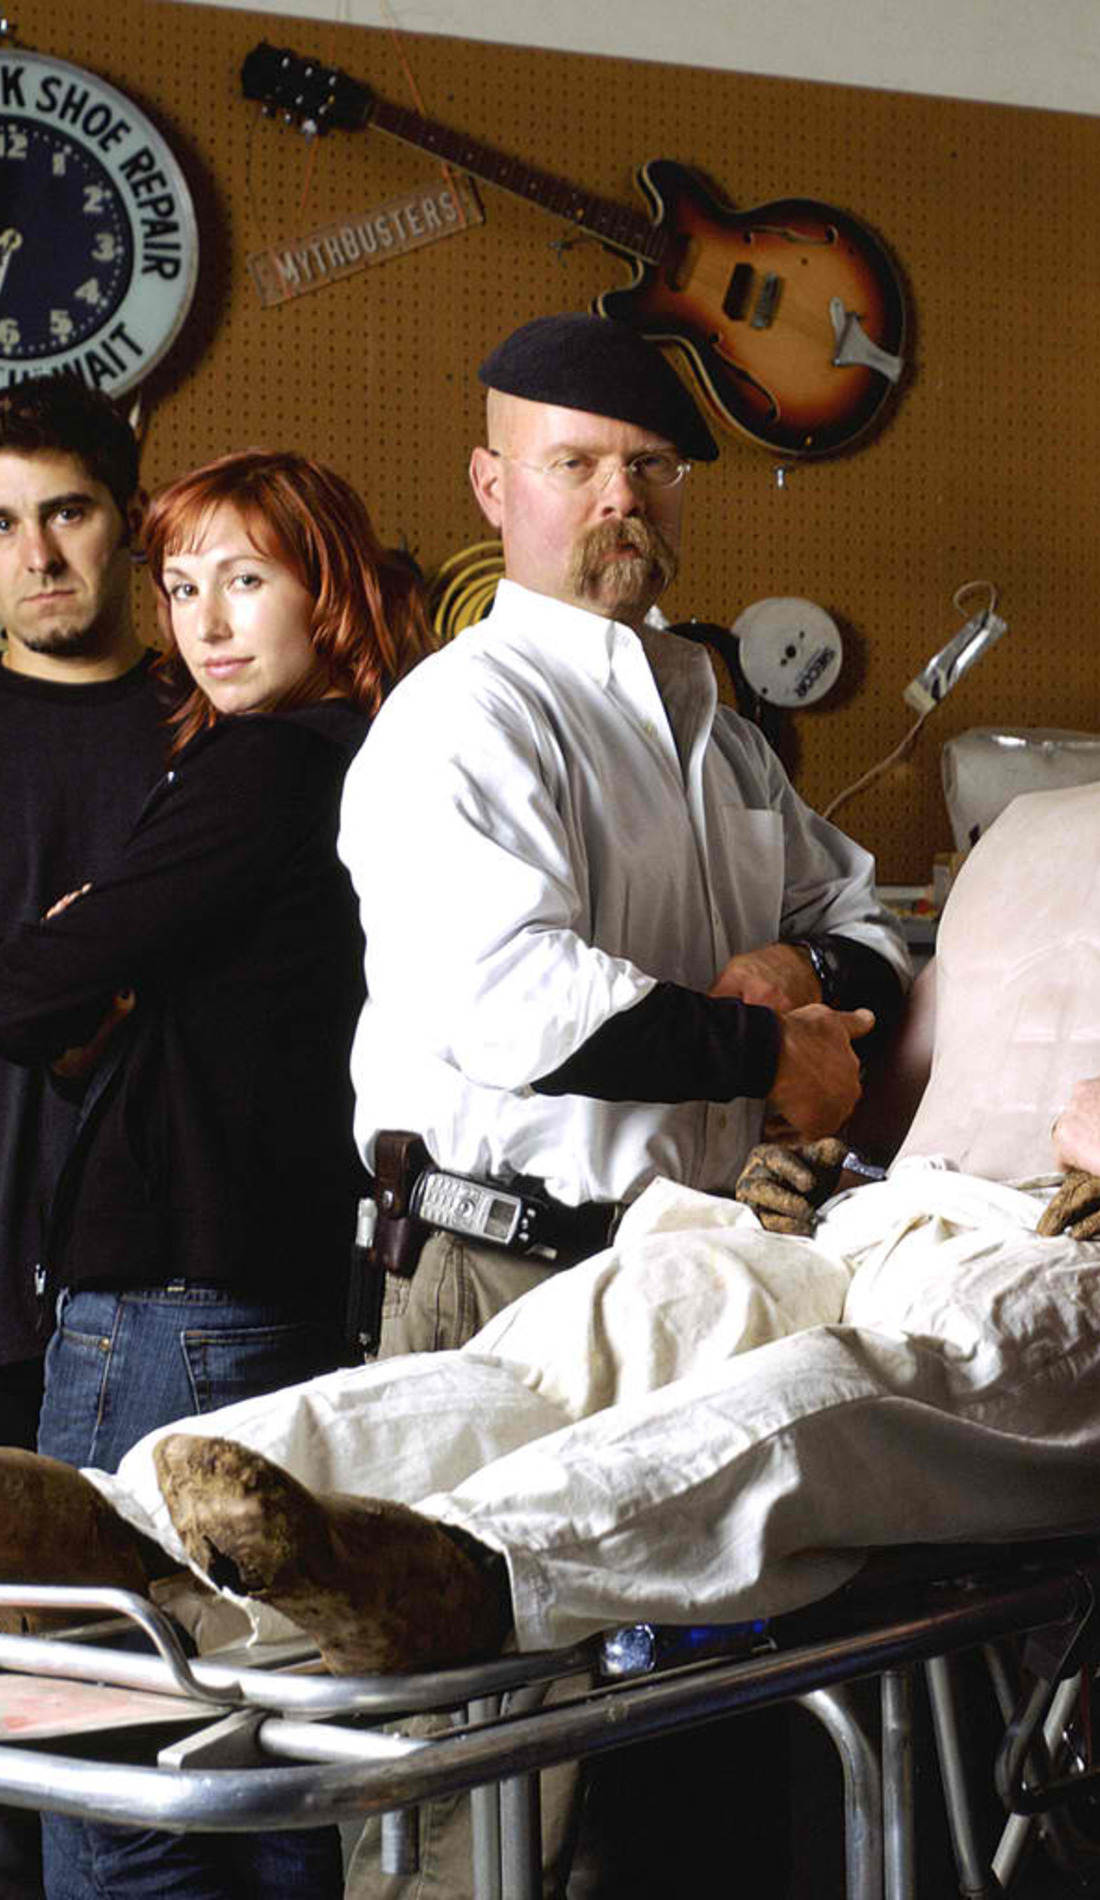 A Mythbusters live event